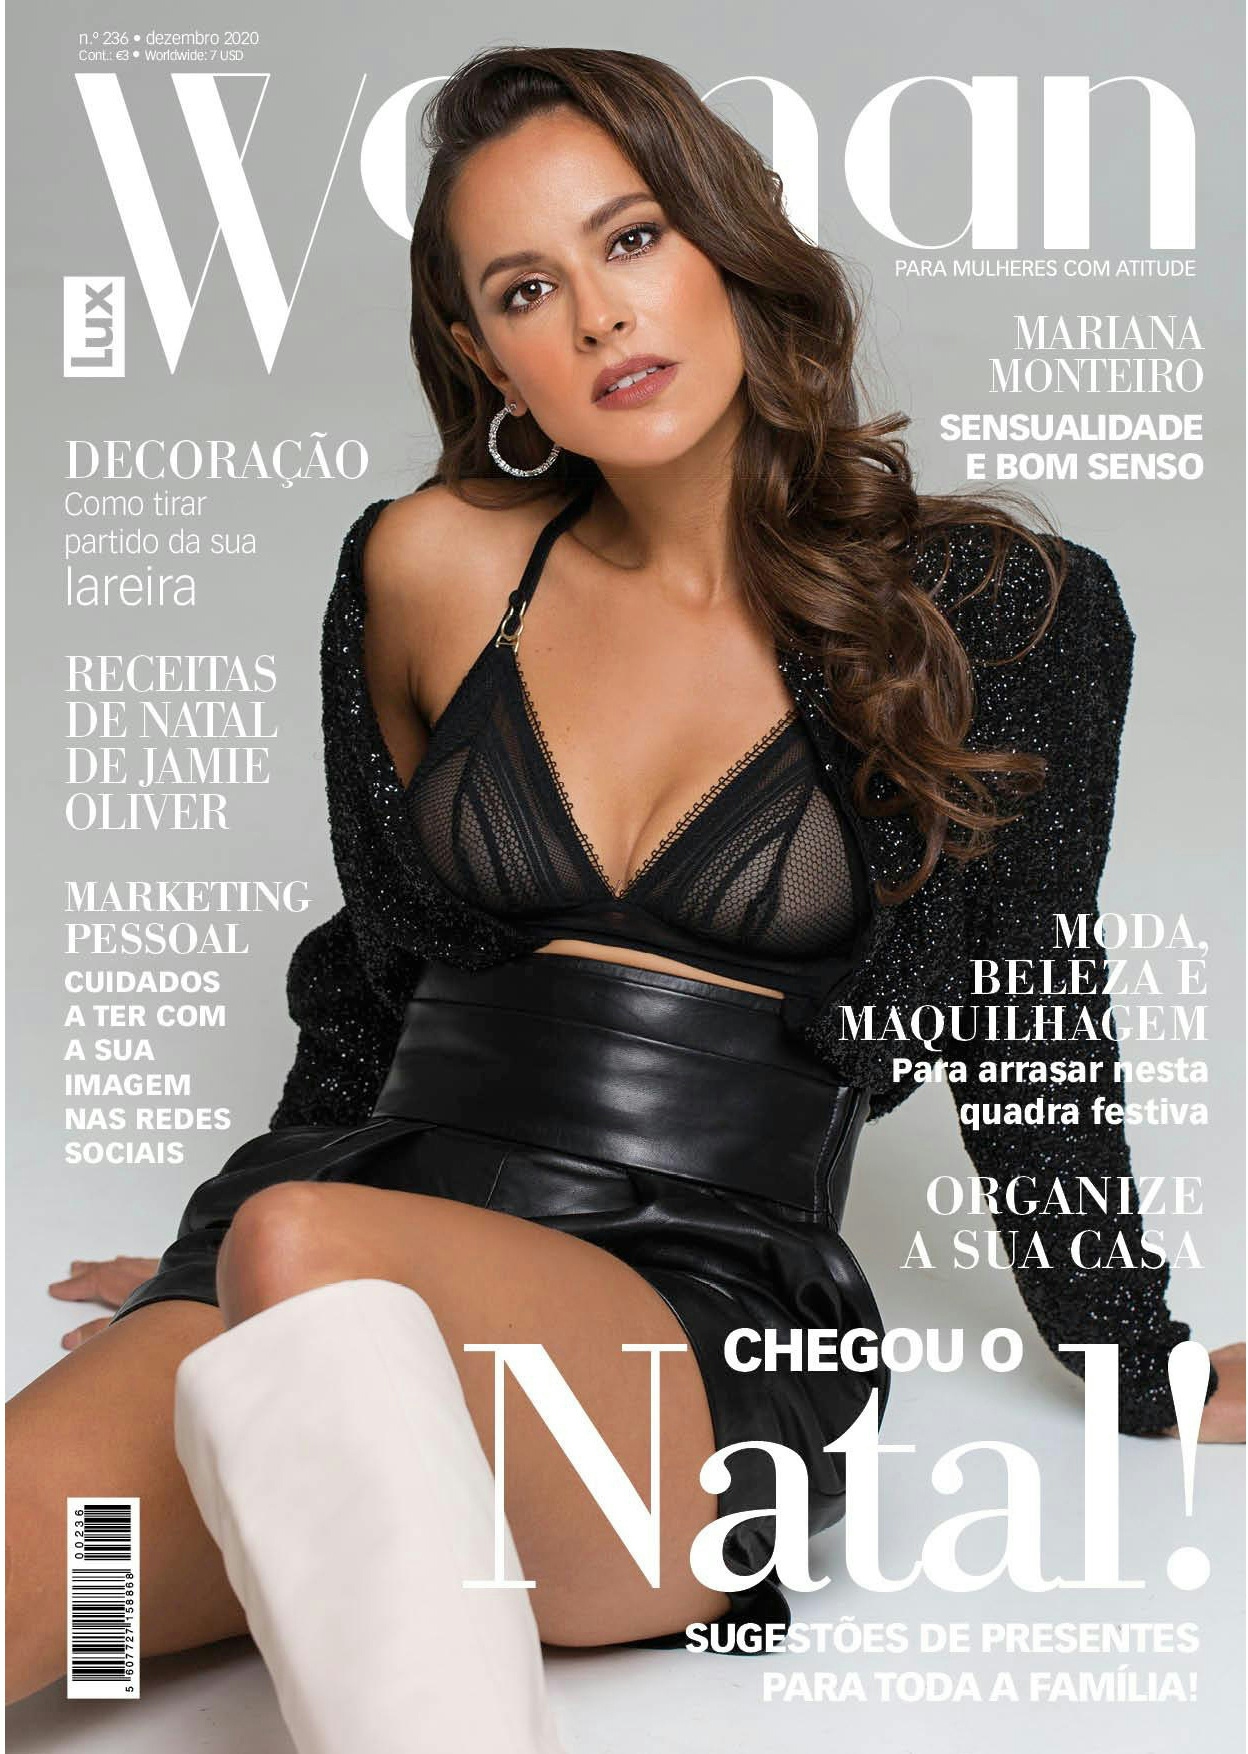 A woman sits on a couch wearing leather boots and black lingerie. She is on the cover of Woman magazine, which shows she is featured as
the model